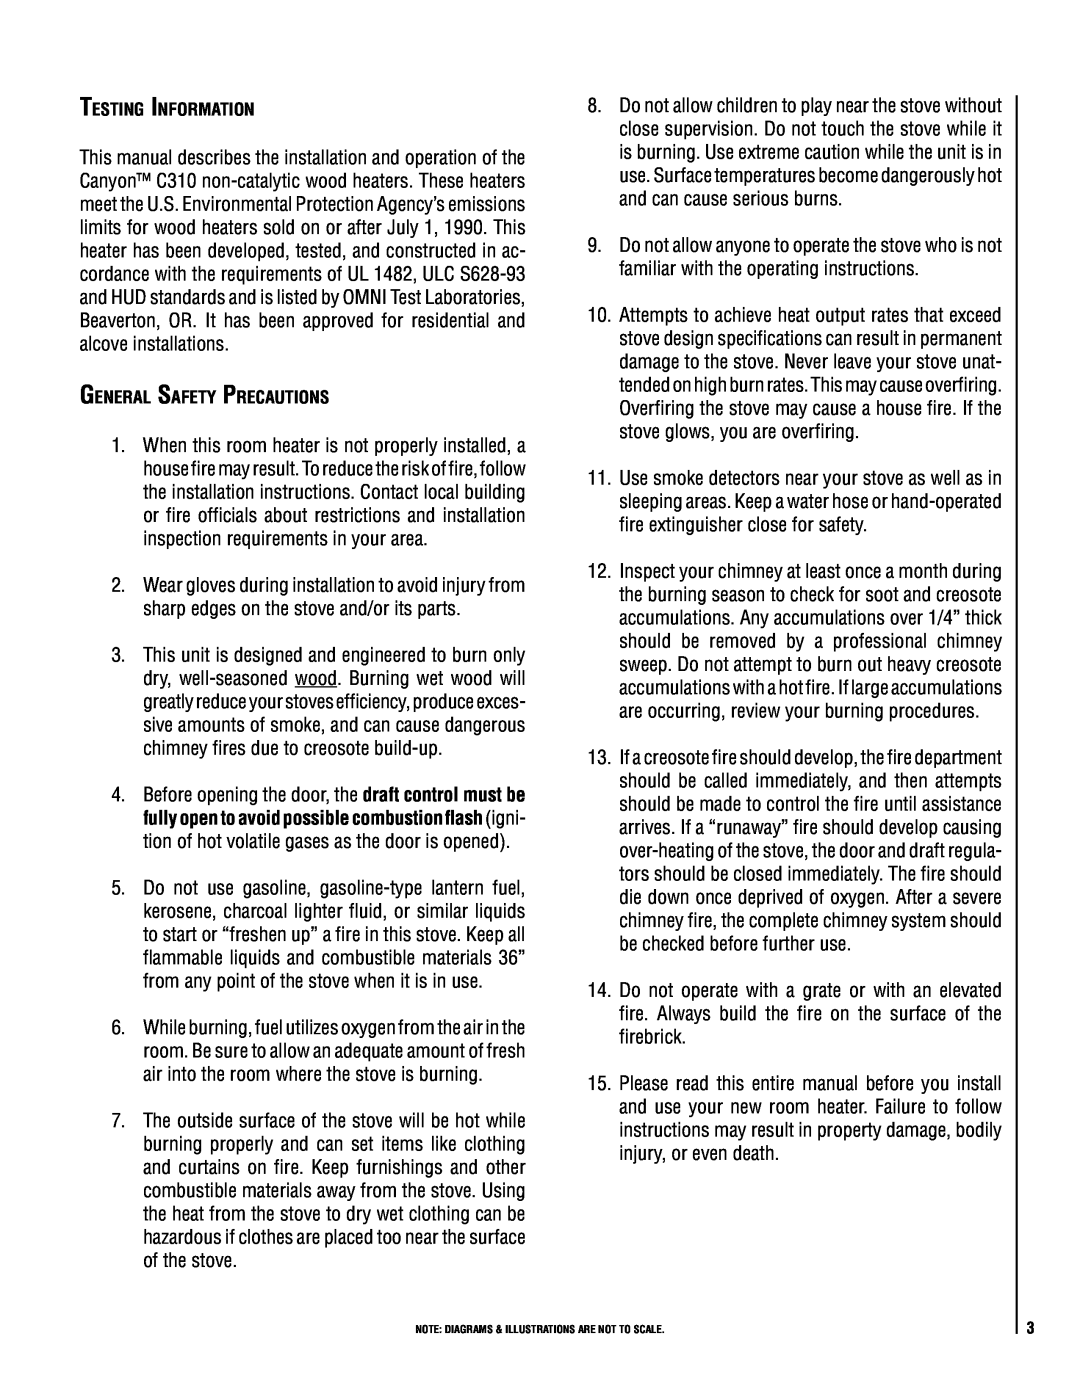 Maytag C310 operation manual Testing Information, General Safety Precautions 